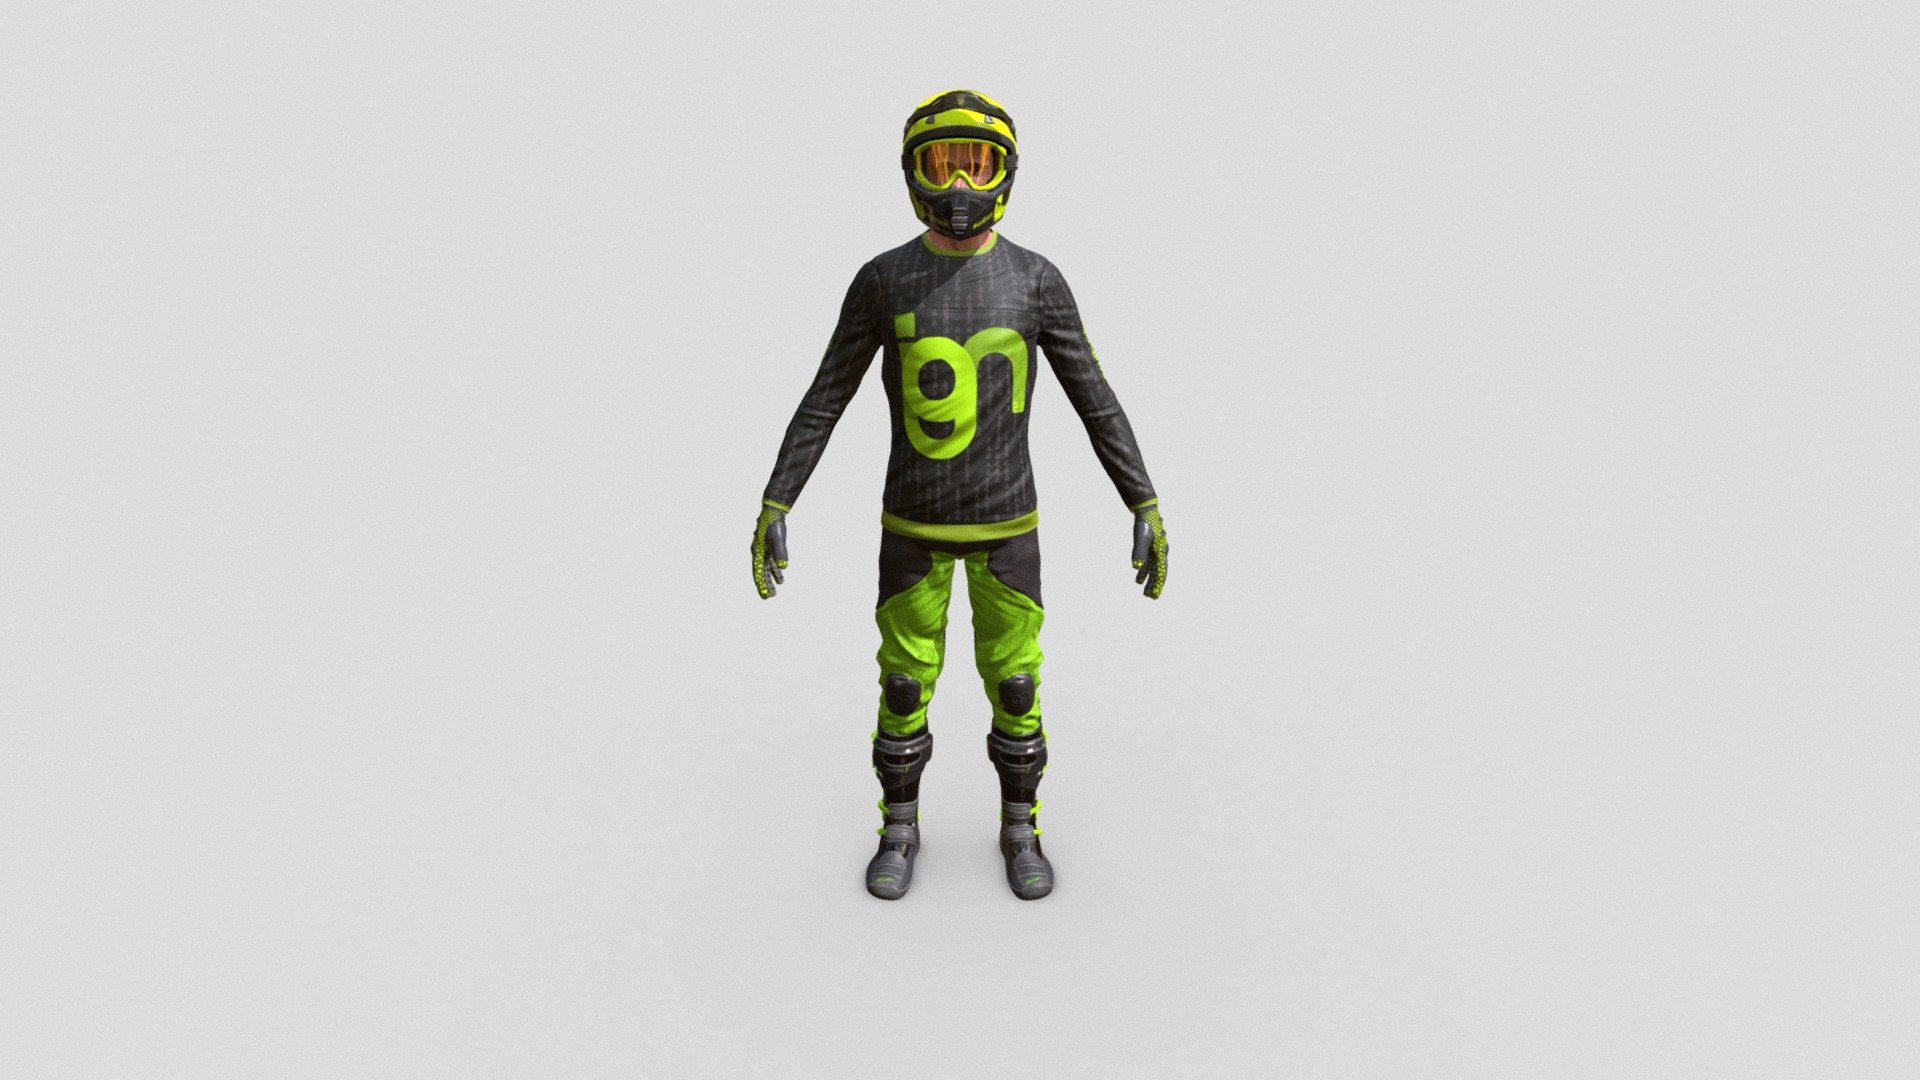 Motocross Biker character - high detail.

PBR textures for , redshift, standard PBR, Unity PBR and Unreal Engine 4 PBR.

• Fake branded textures

• Non branded Textures for easy tweaking and adding custom graphics.

•Additional PBR dirt maps with masks for dry and wet dirt.

•Body collision mesh for cloth simulation if needed.

•Basic null FBX rig for posing or retargeting 3d model